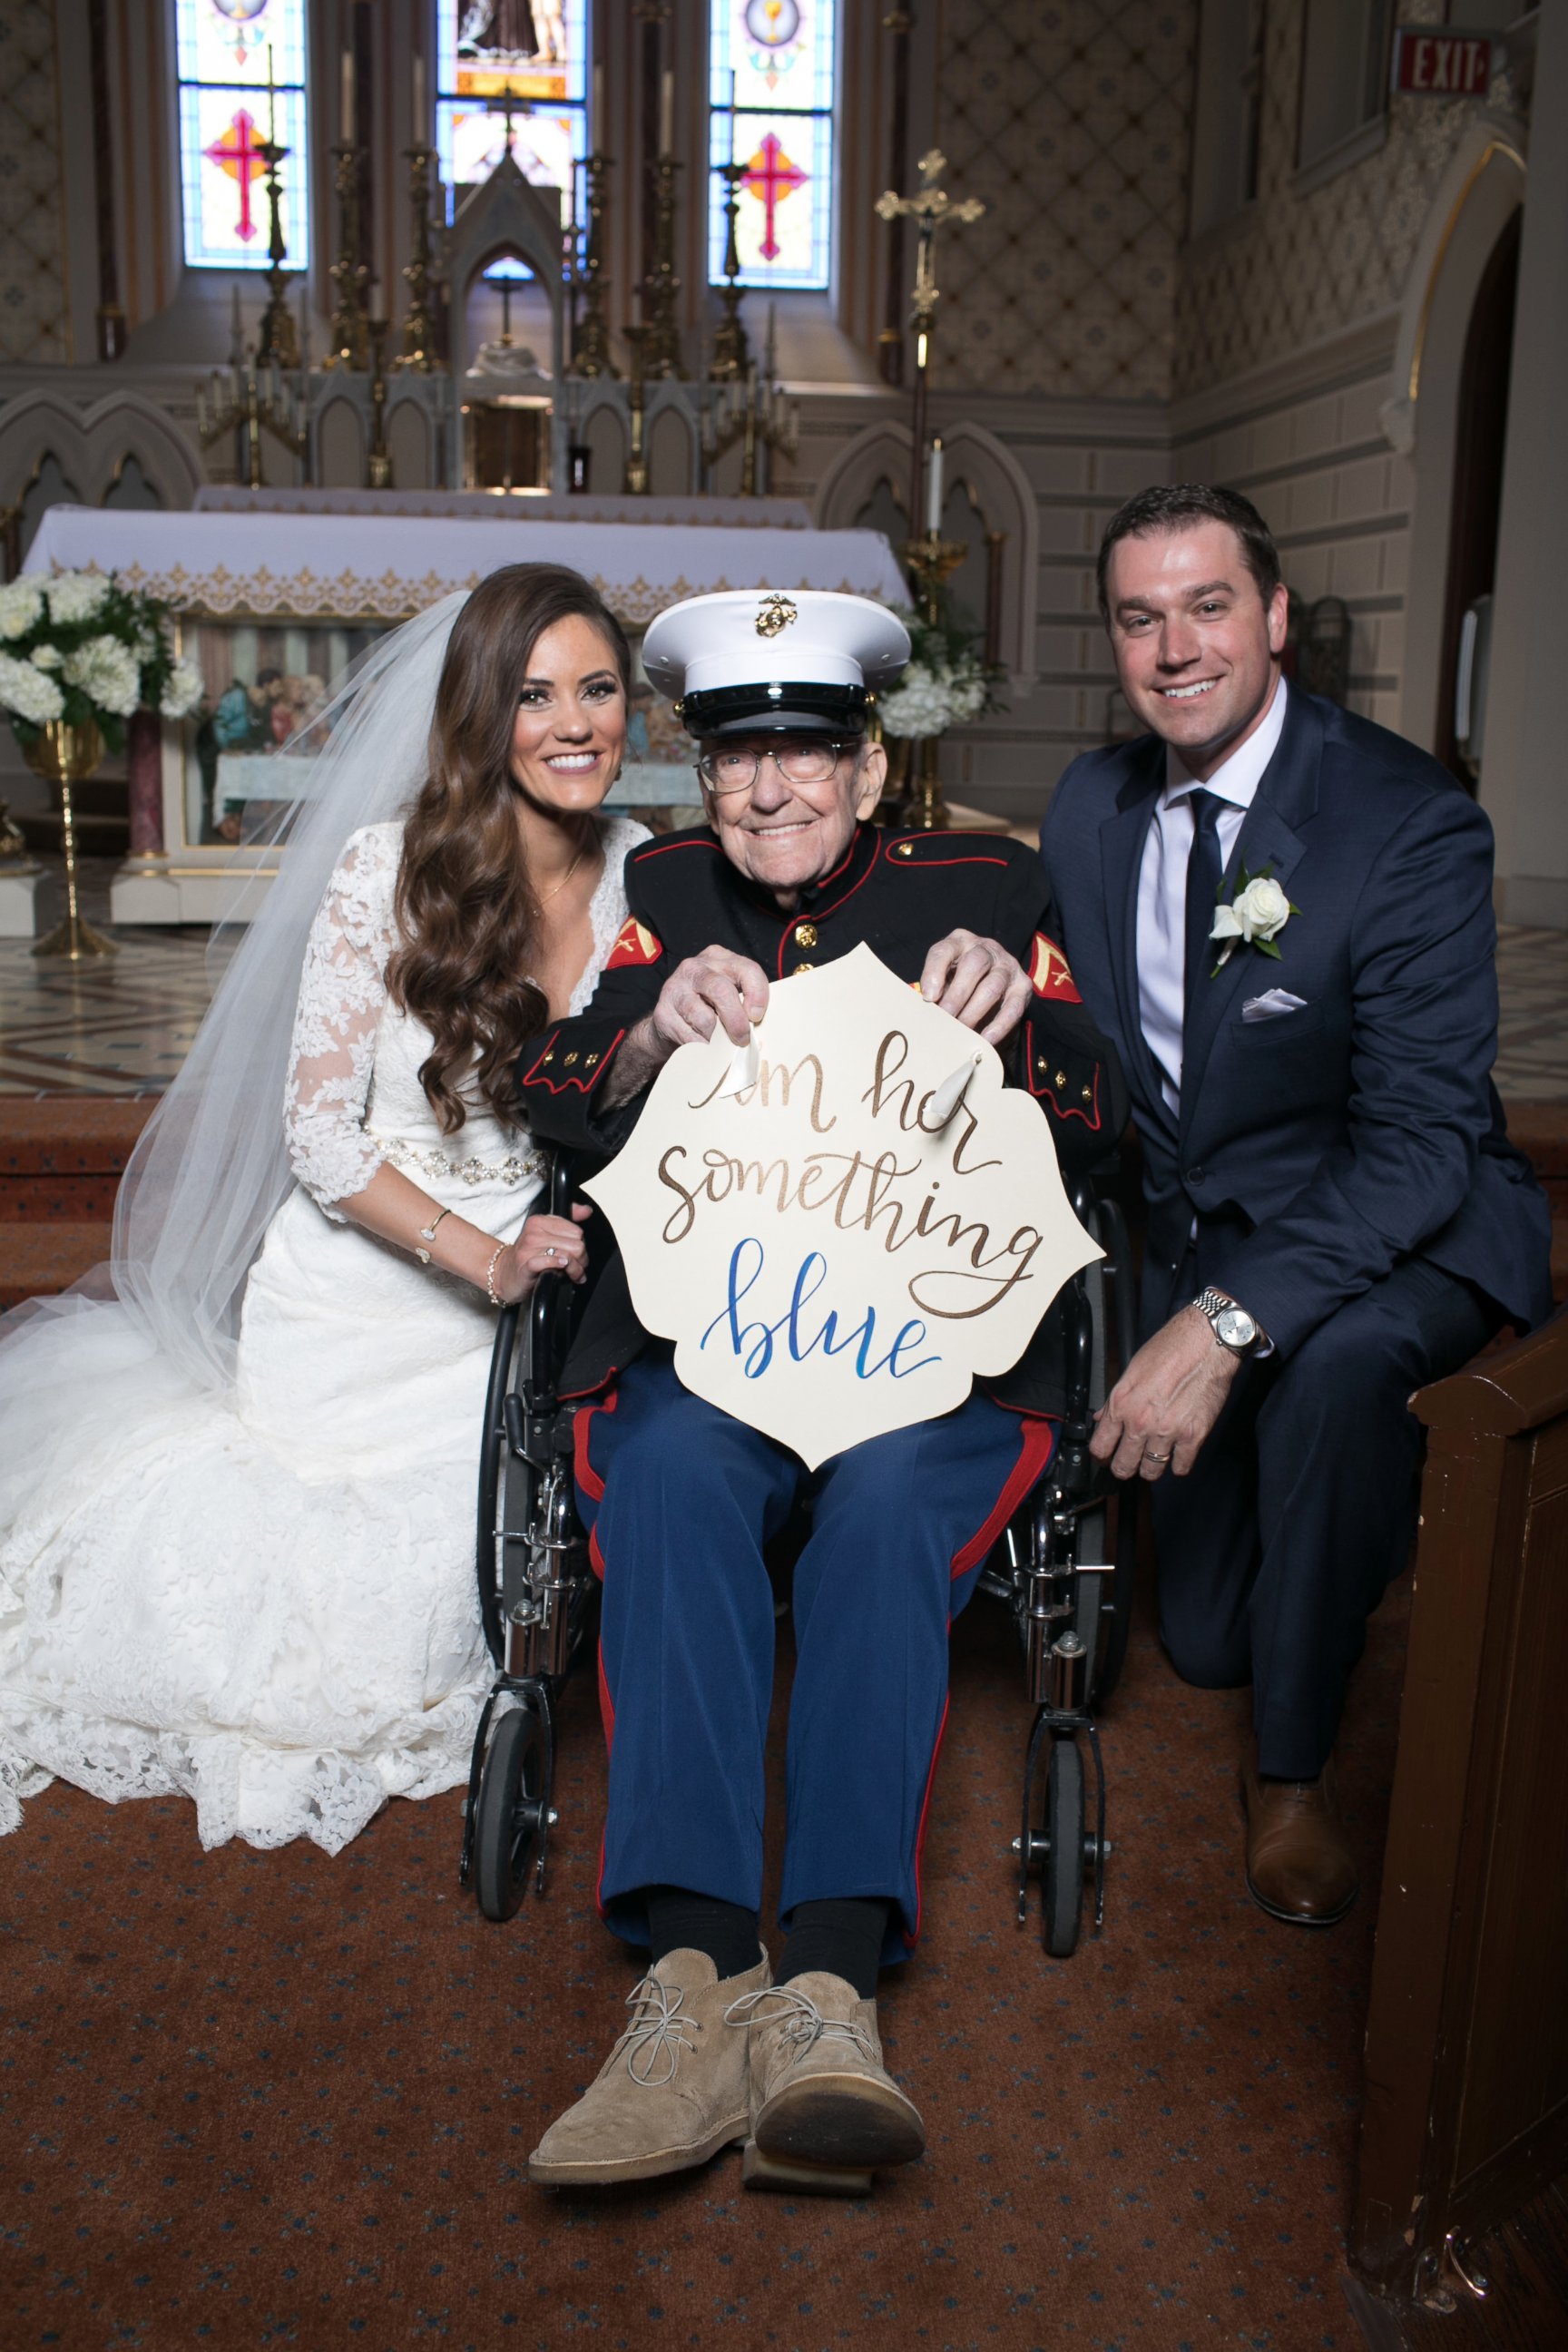 PHOTO: Alison Ferrell's 92-year-old uncle, Bill Lee Eblen, served as her "something blue" in his Marine dress blues at her May 13 wedding.